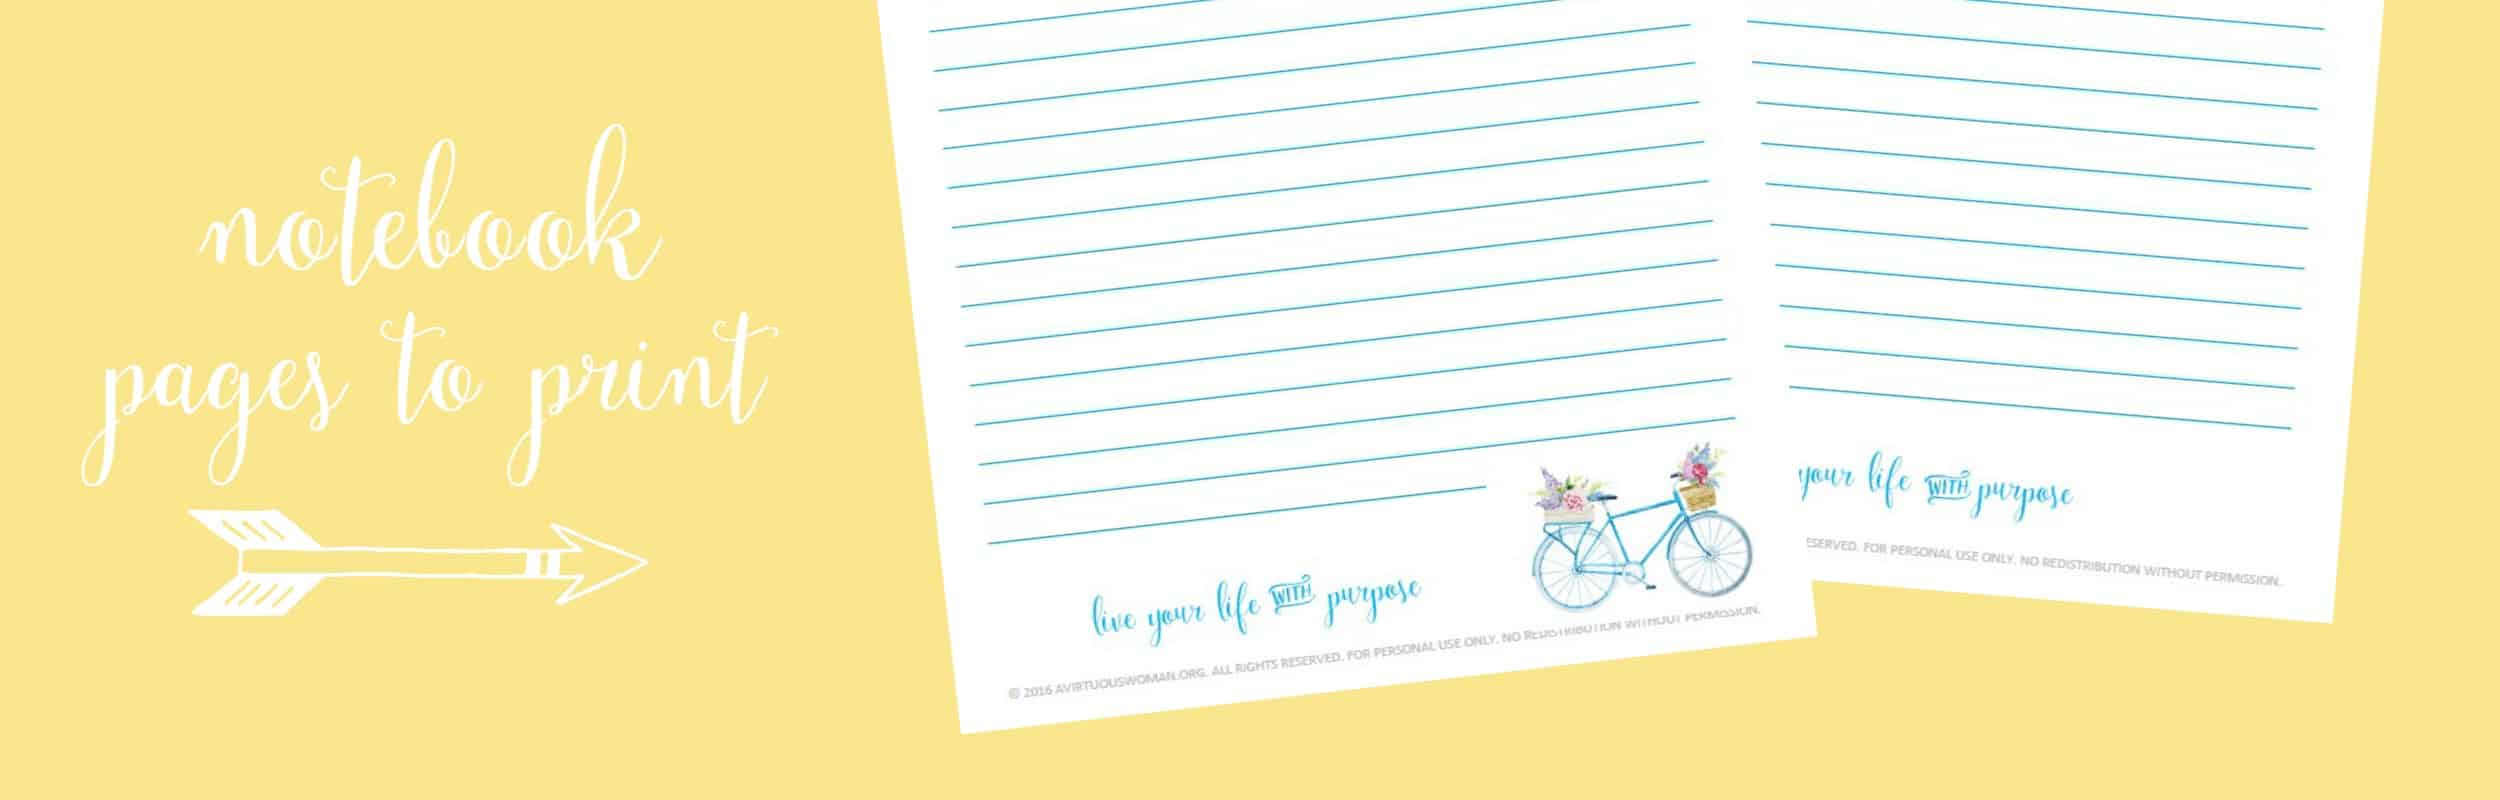 Free Printable Notebook Pages